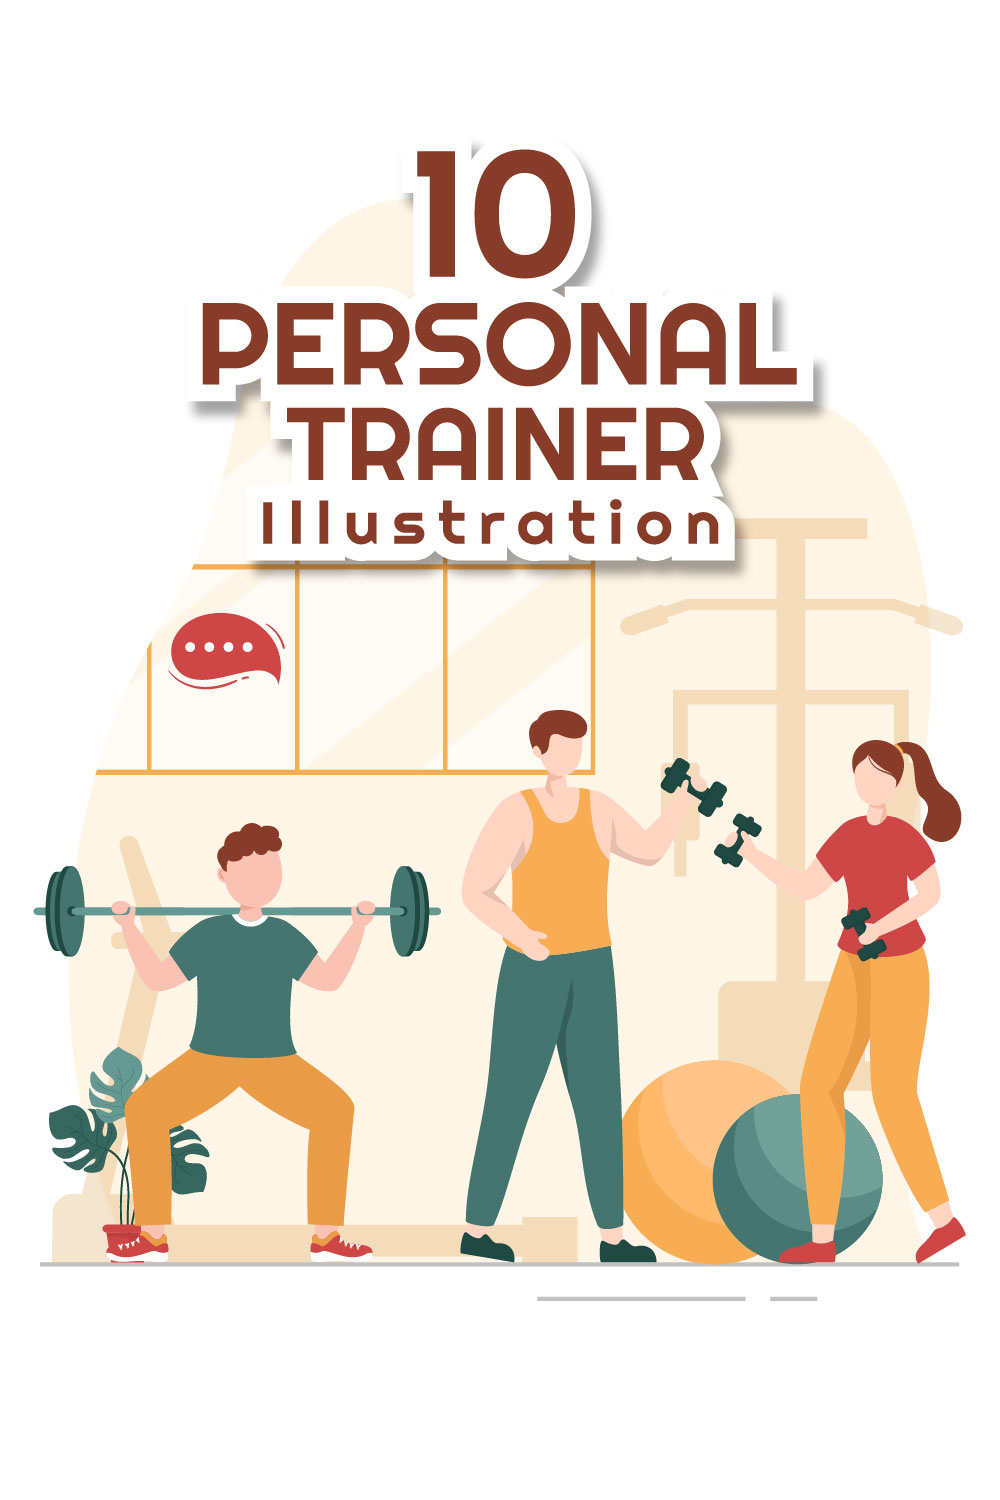 Personal Trainer or Sports Instructor Illustration Pinterest image.